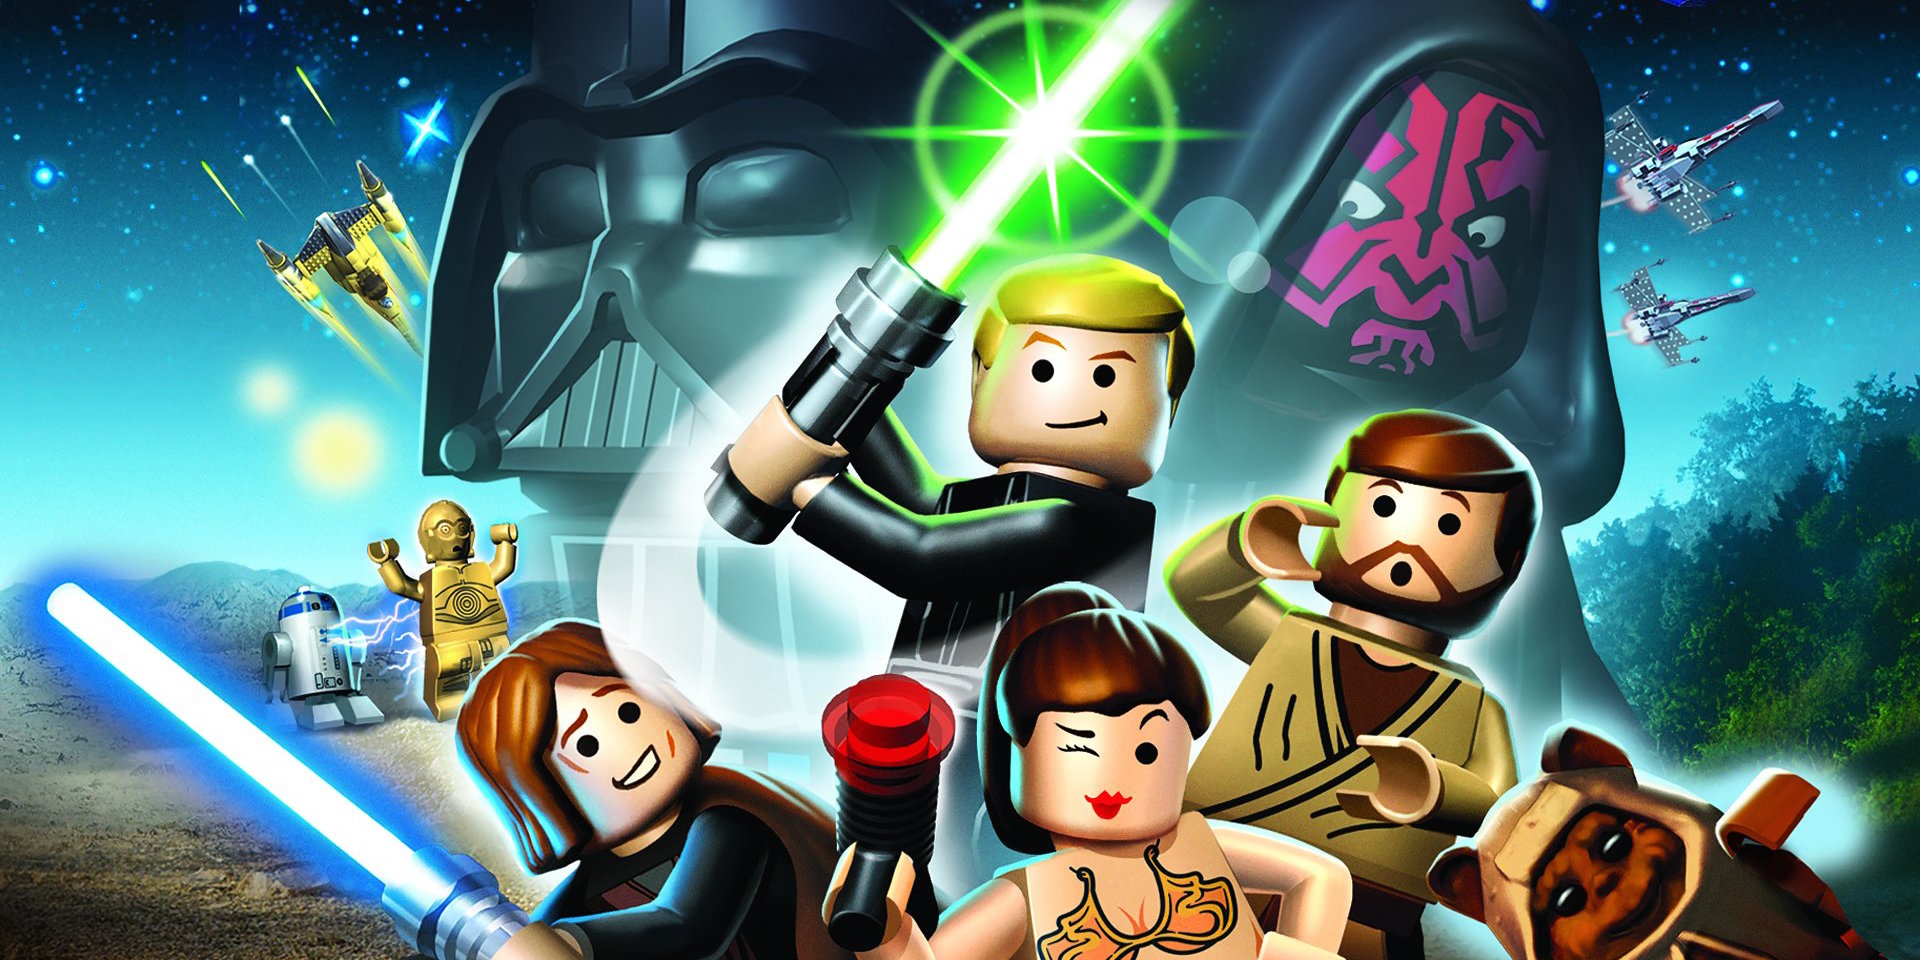 new lego star wars game download free